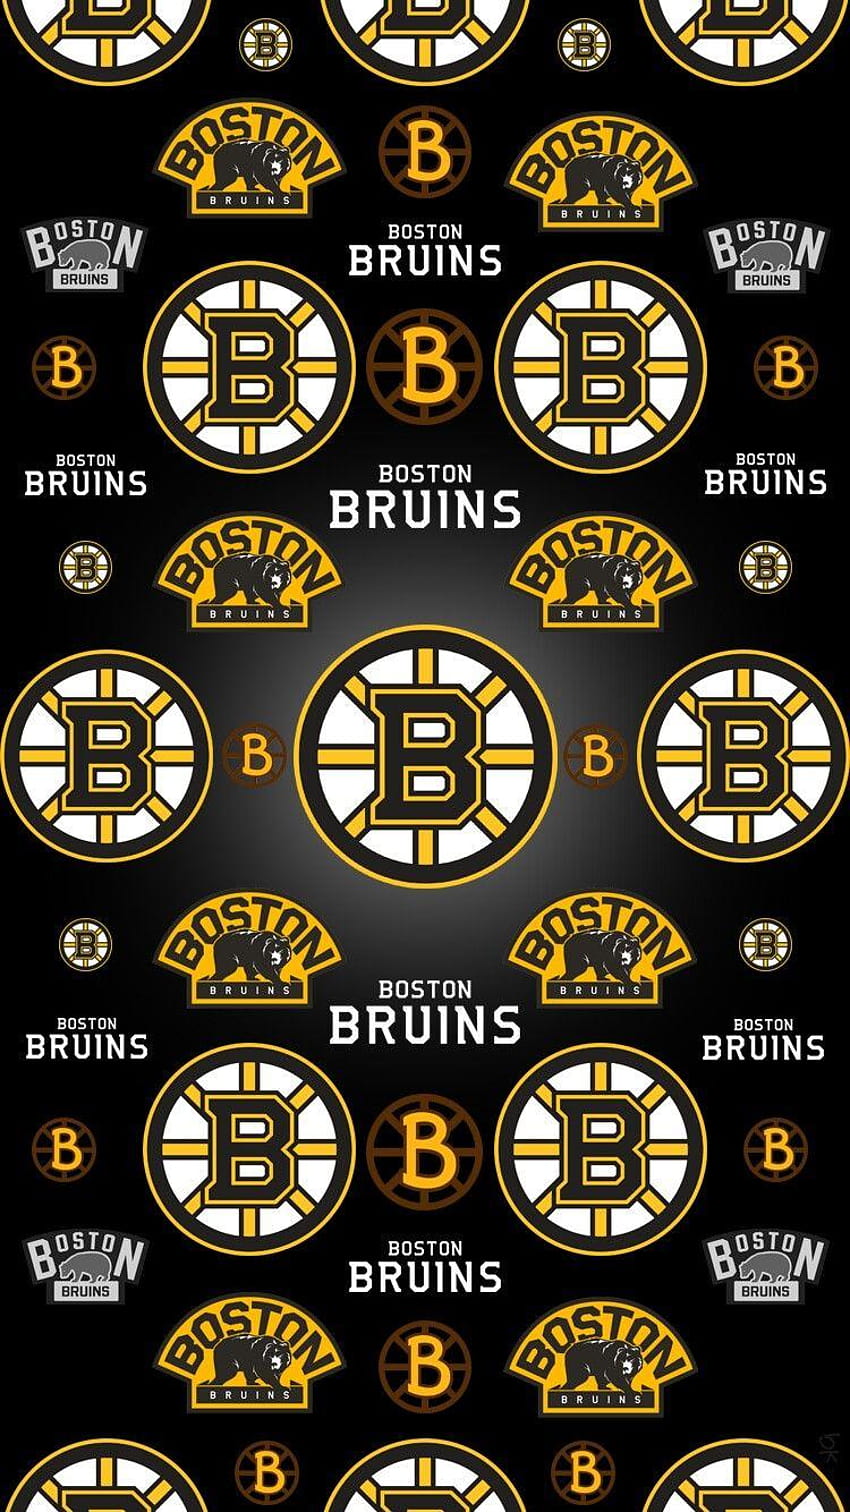 Sized at 720 x 1280 to fit as a phone, boston bruins mobile HD phone wallpaper